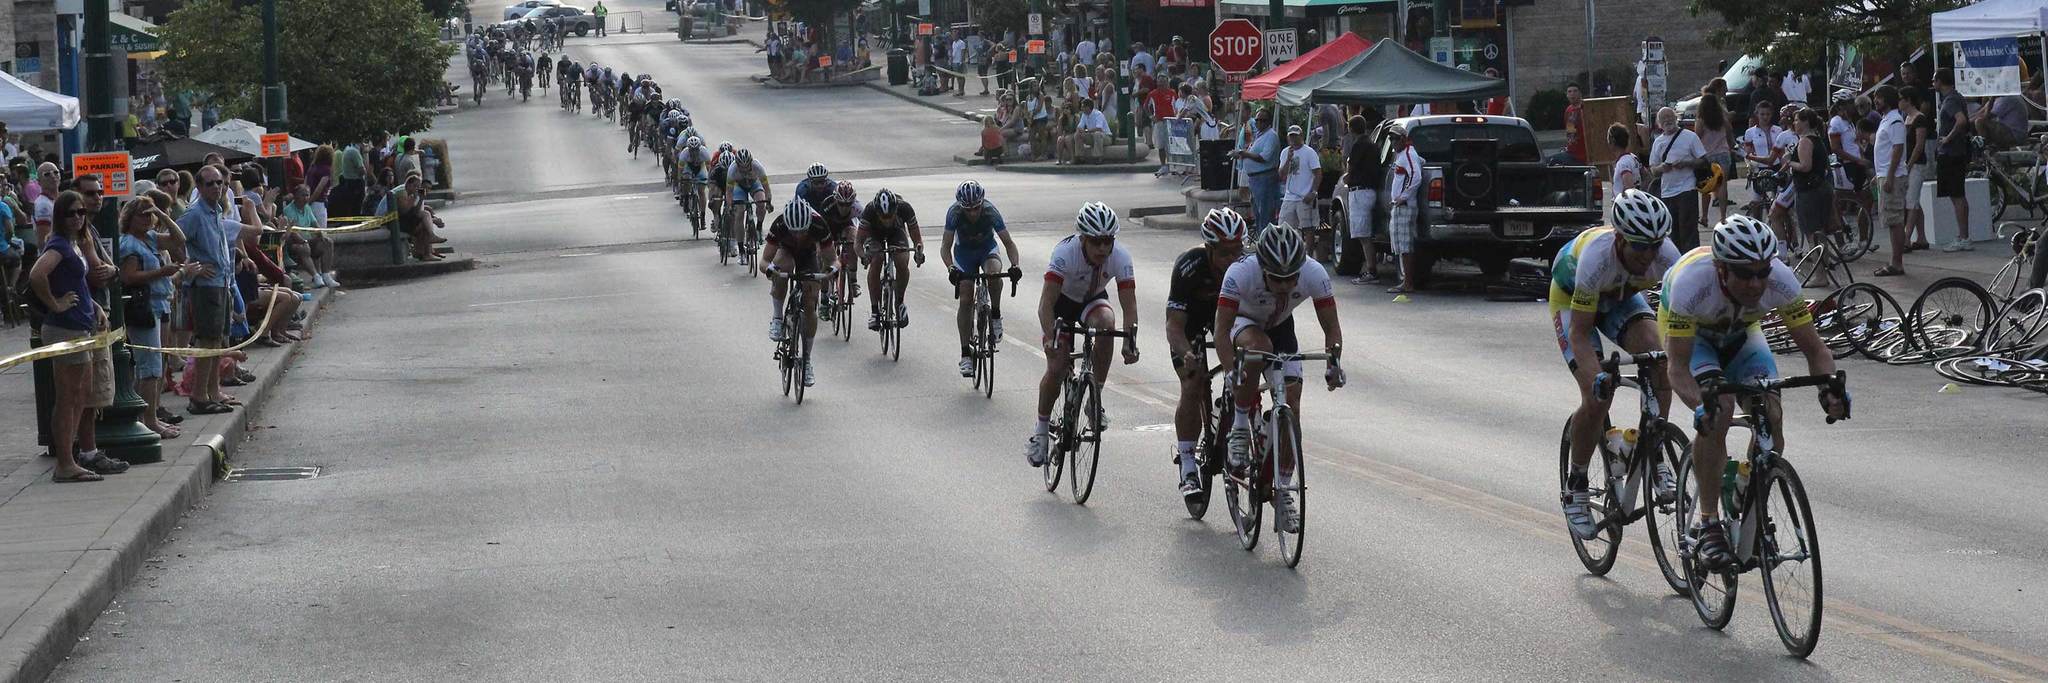 cycling race in downtown